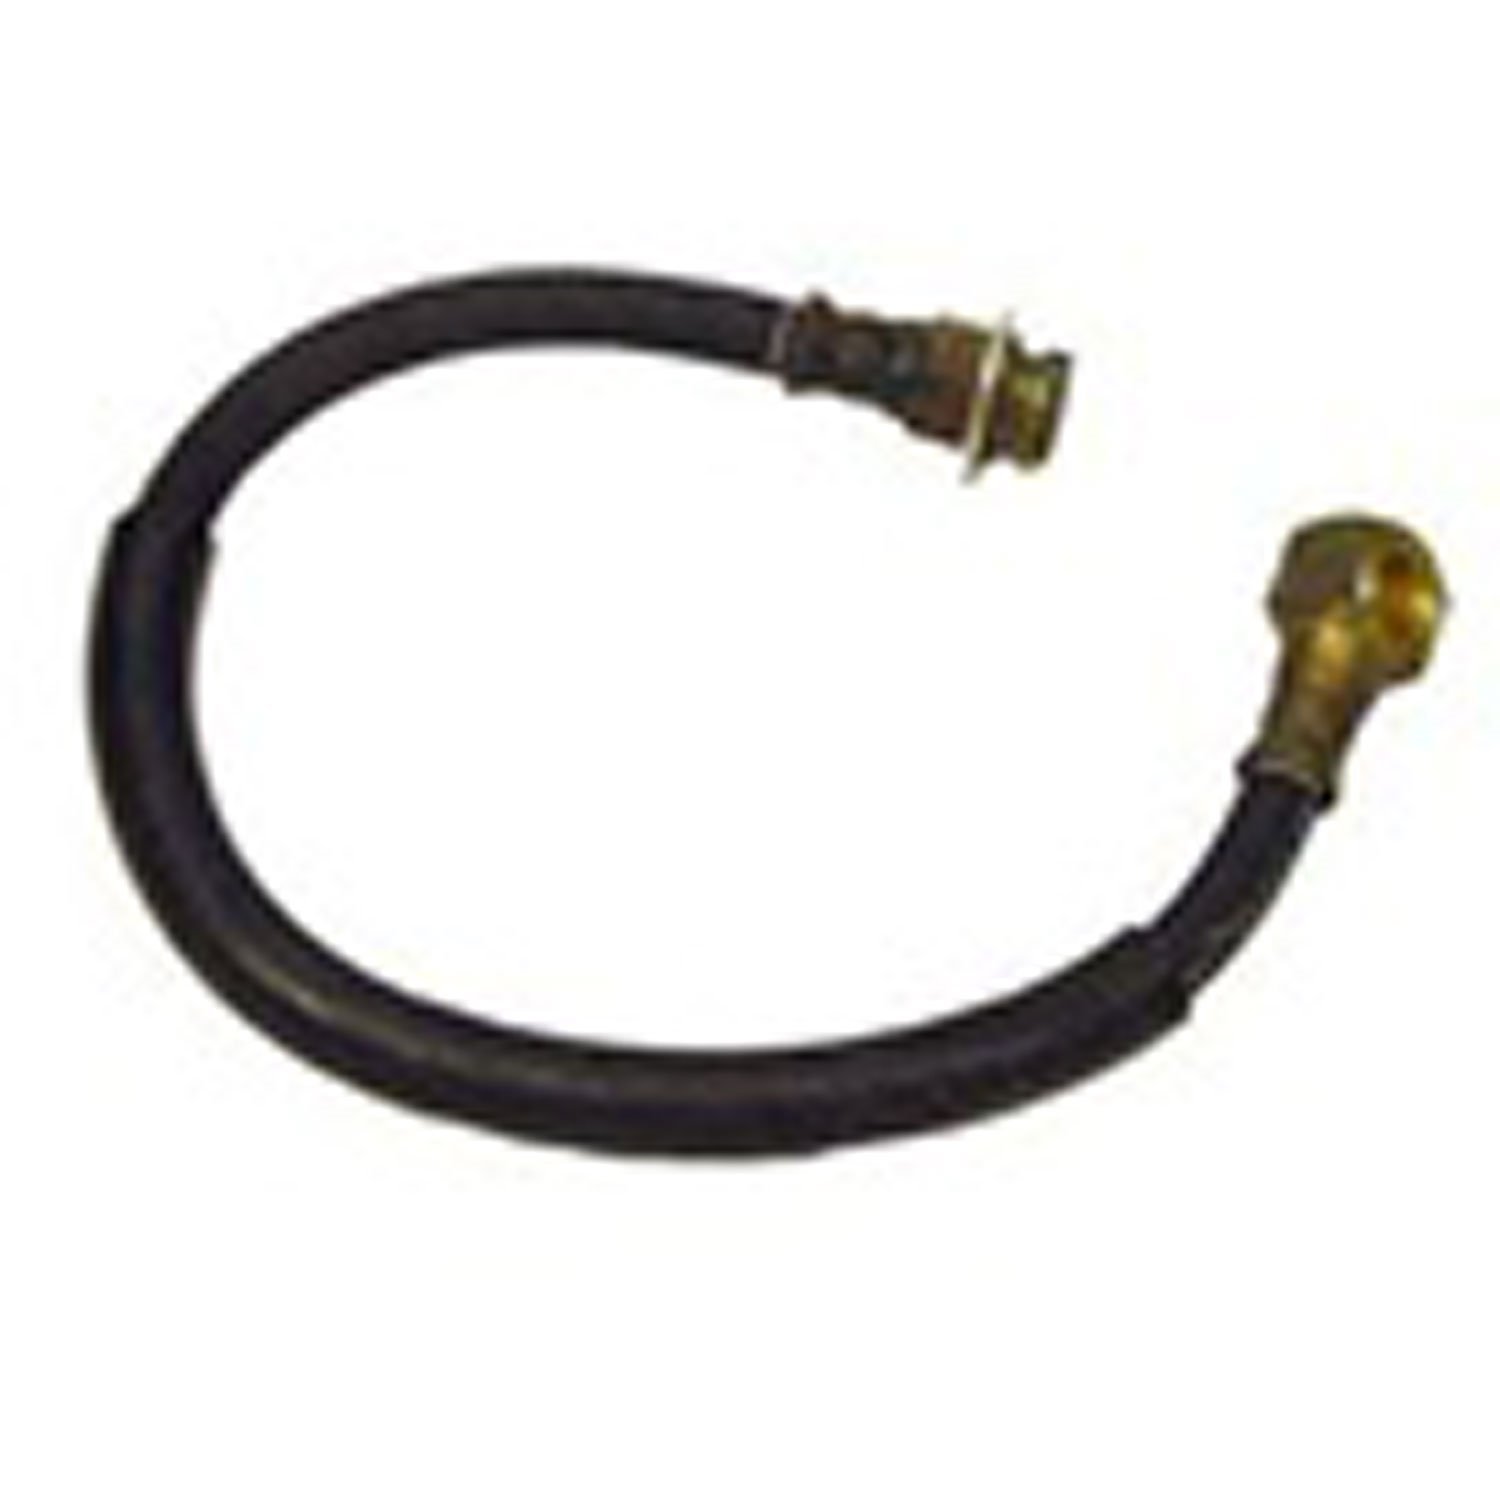 Brake Hose Front For Disc Brakes With 2-Bolt Calipers 78-81 Jeep CJ5 CJ7 and CJ8 Scrambler